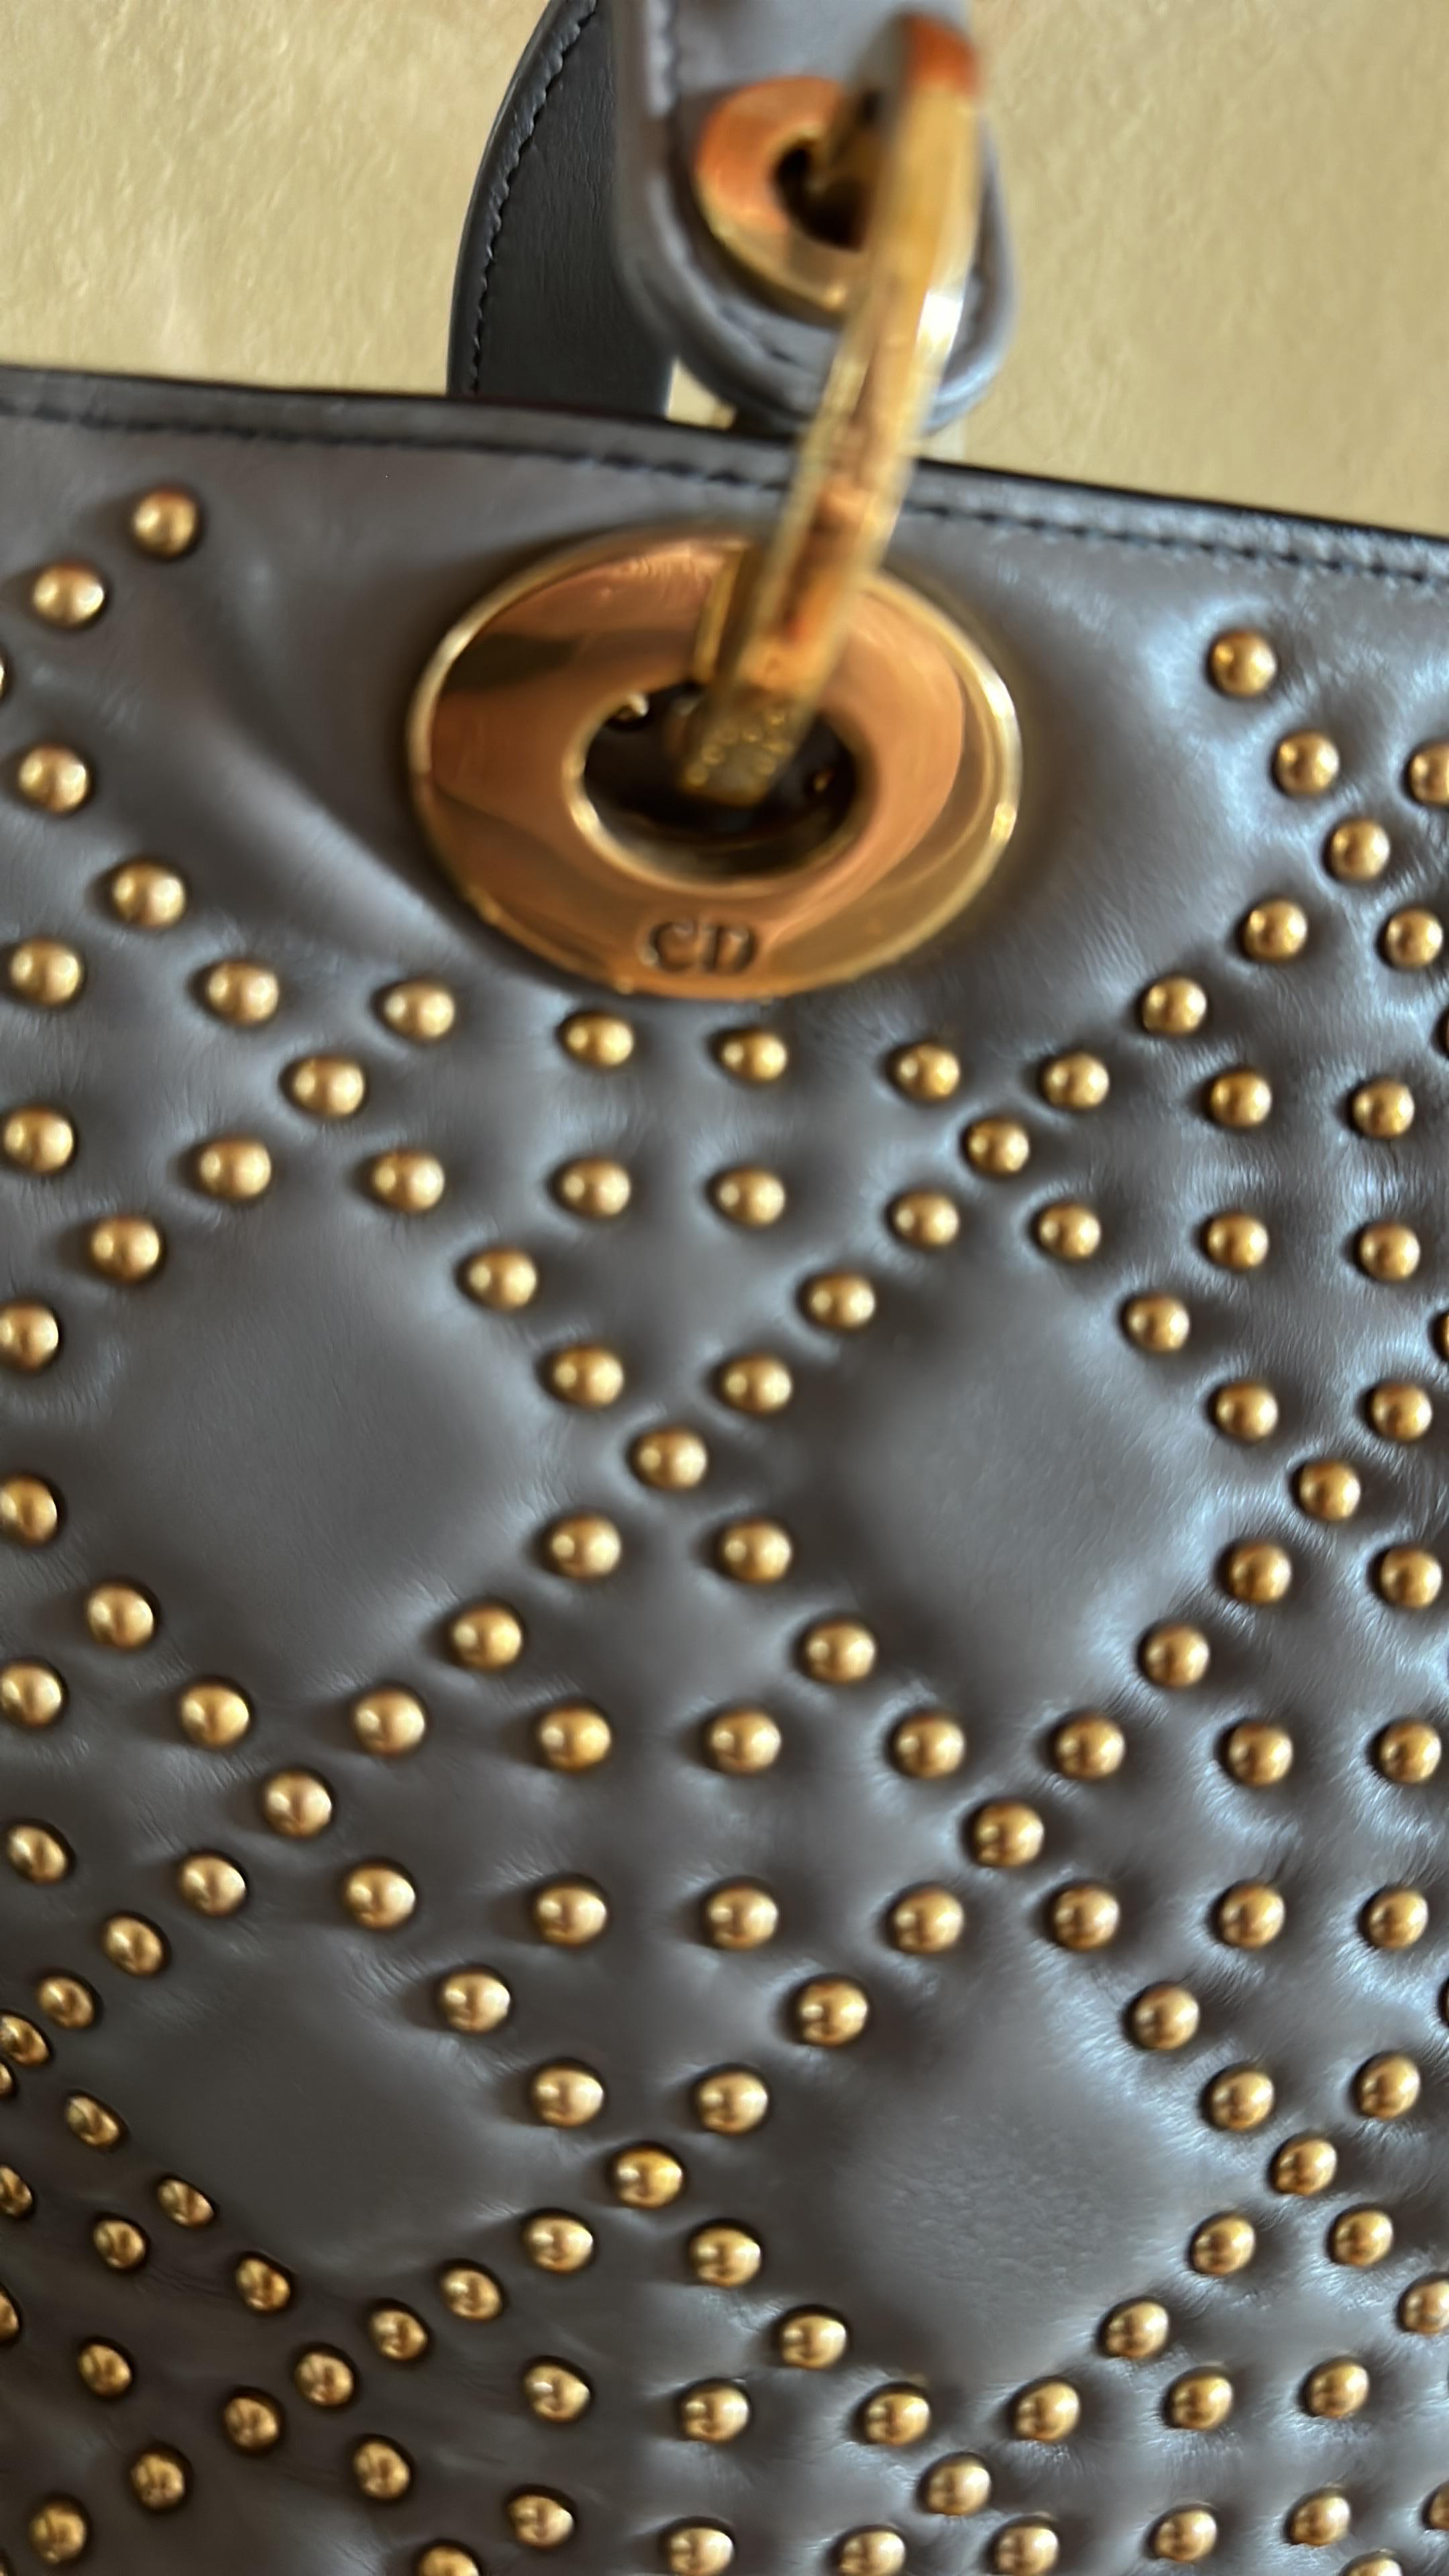 Lady Dior bag with removable shoulder strap
Lambskin with stud embroidery
Medium size 24x20x11
Good Condition , year 2017
Complete with dustbag 


Iconic bag of the Maison, the Lady Dior embodies all the codes of Dior leather goods: washed lambskin